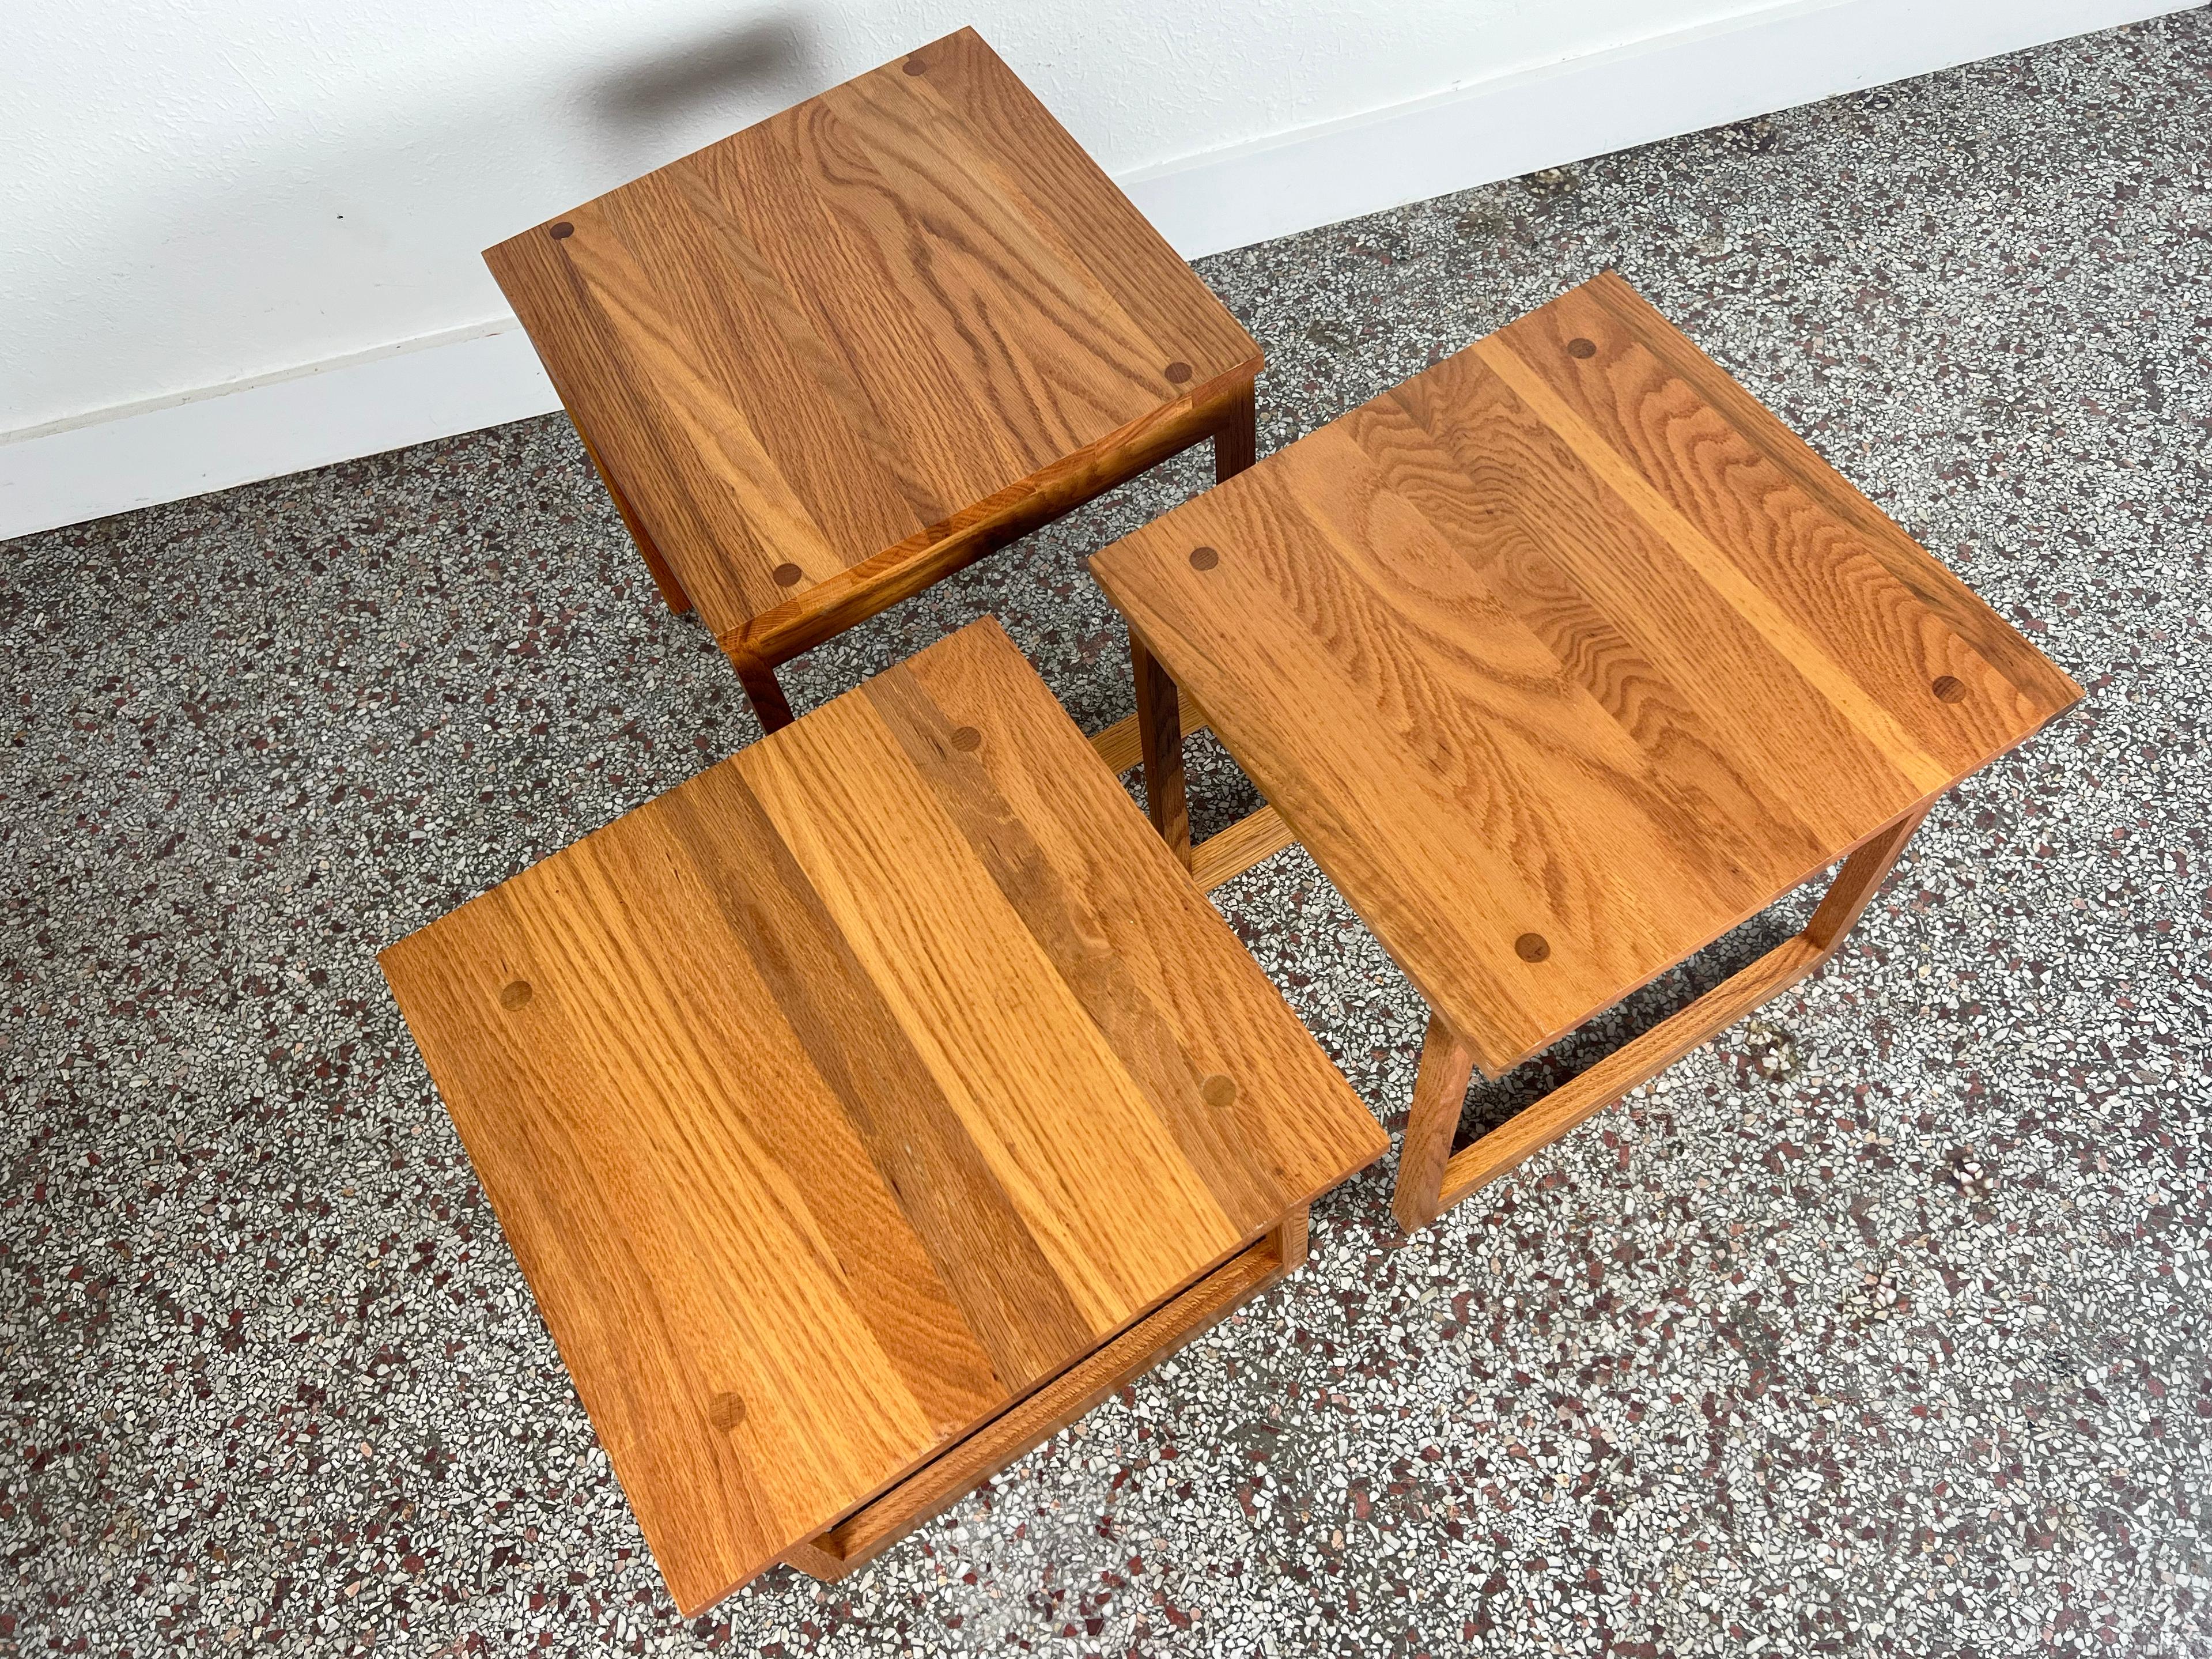  Vintage Studio Crafted Solid Oak Cube of Nesting Tables For Sale 4